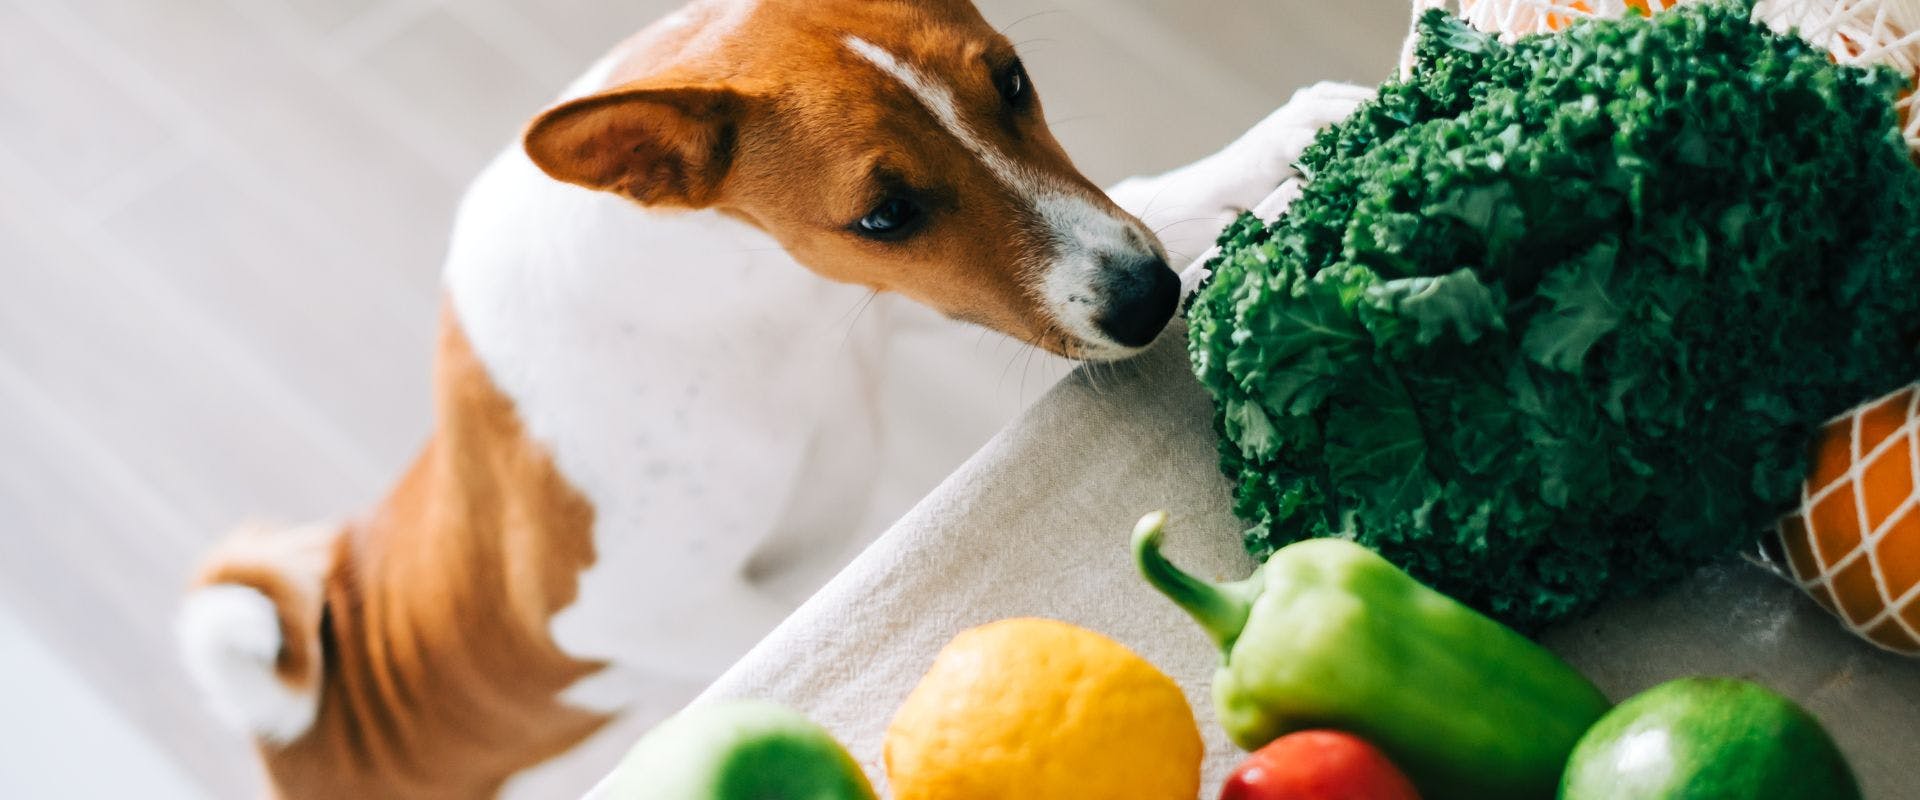 Jack Russell sniffing vegetables